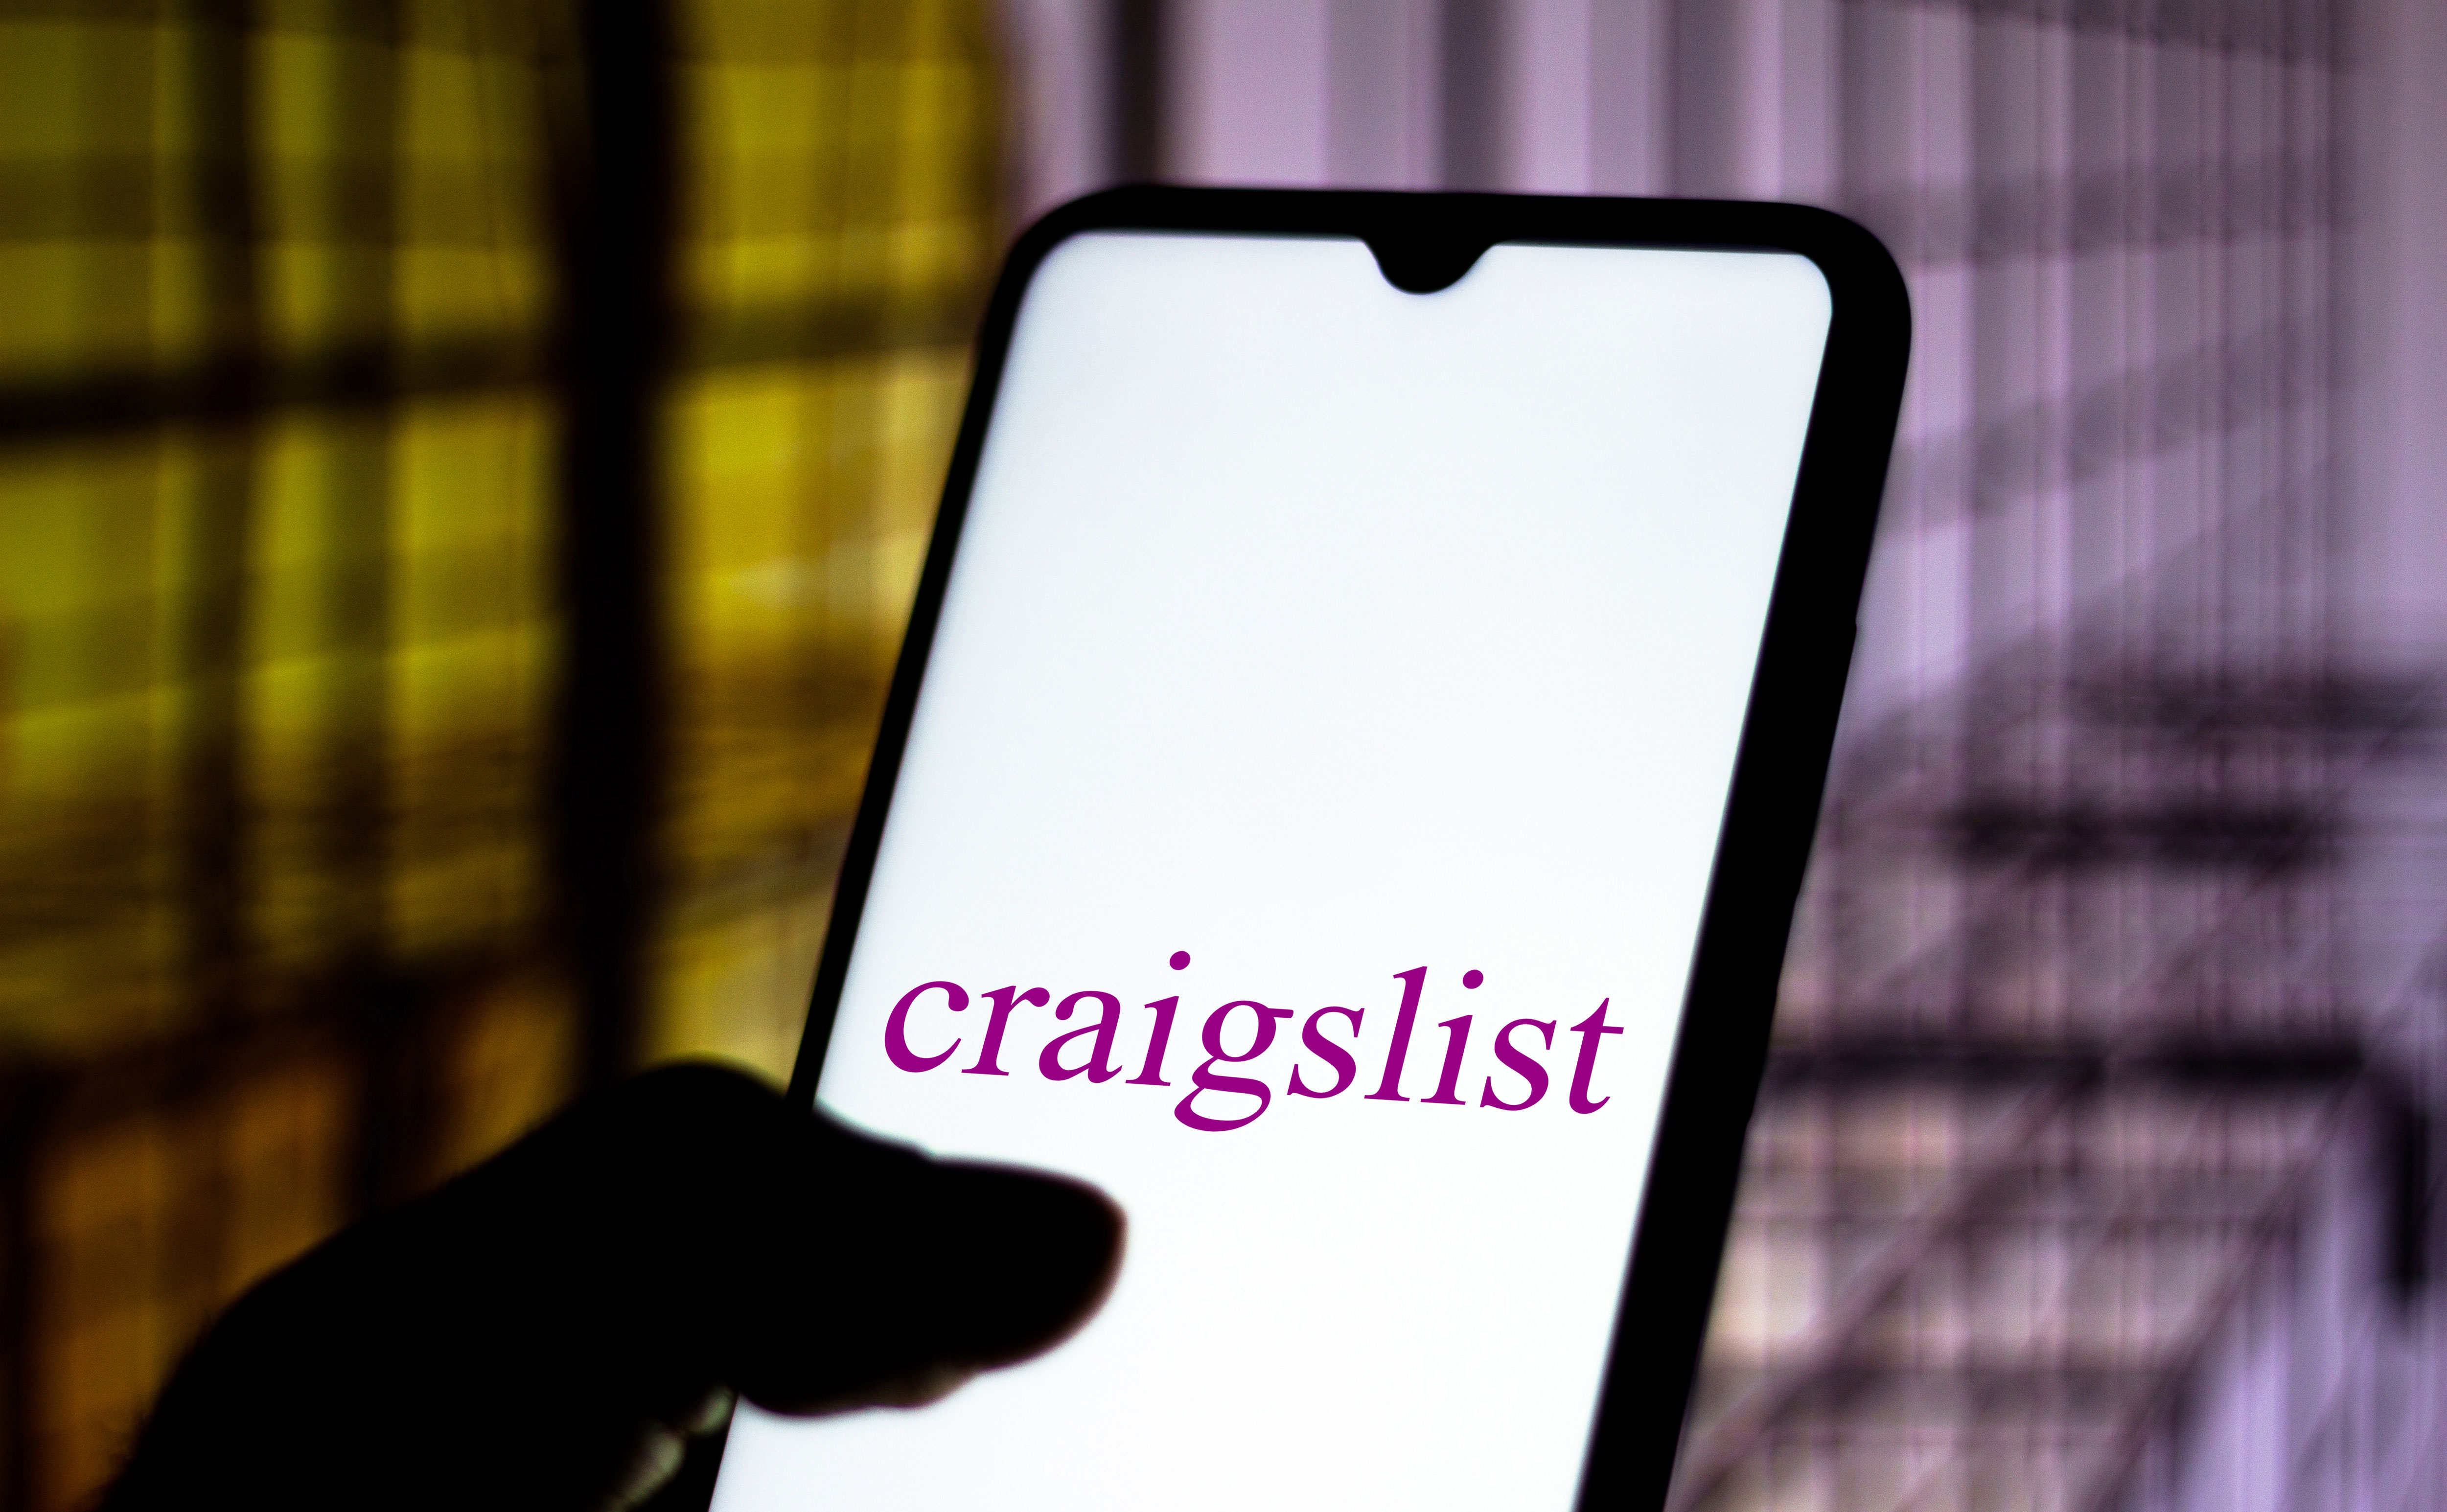 An image of the Craigslist logo displayed on a smartphone.